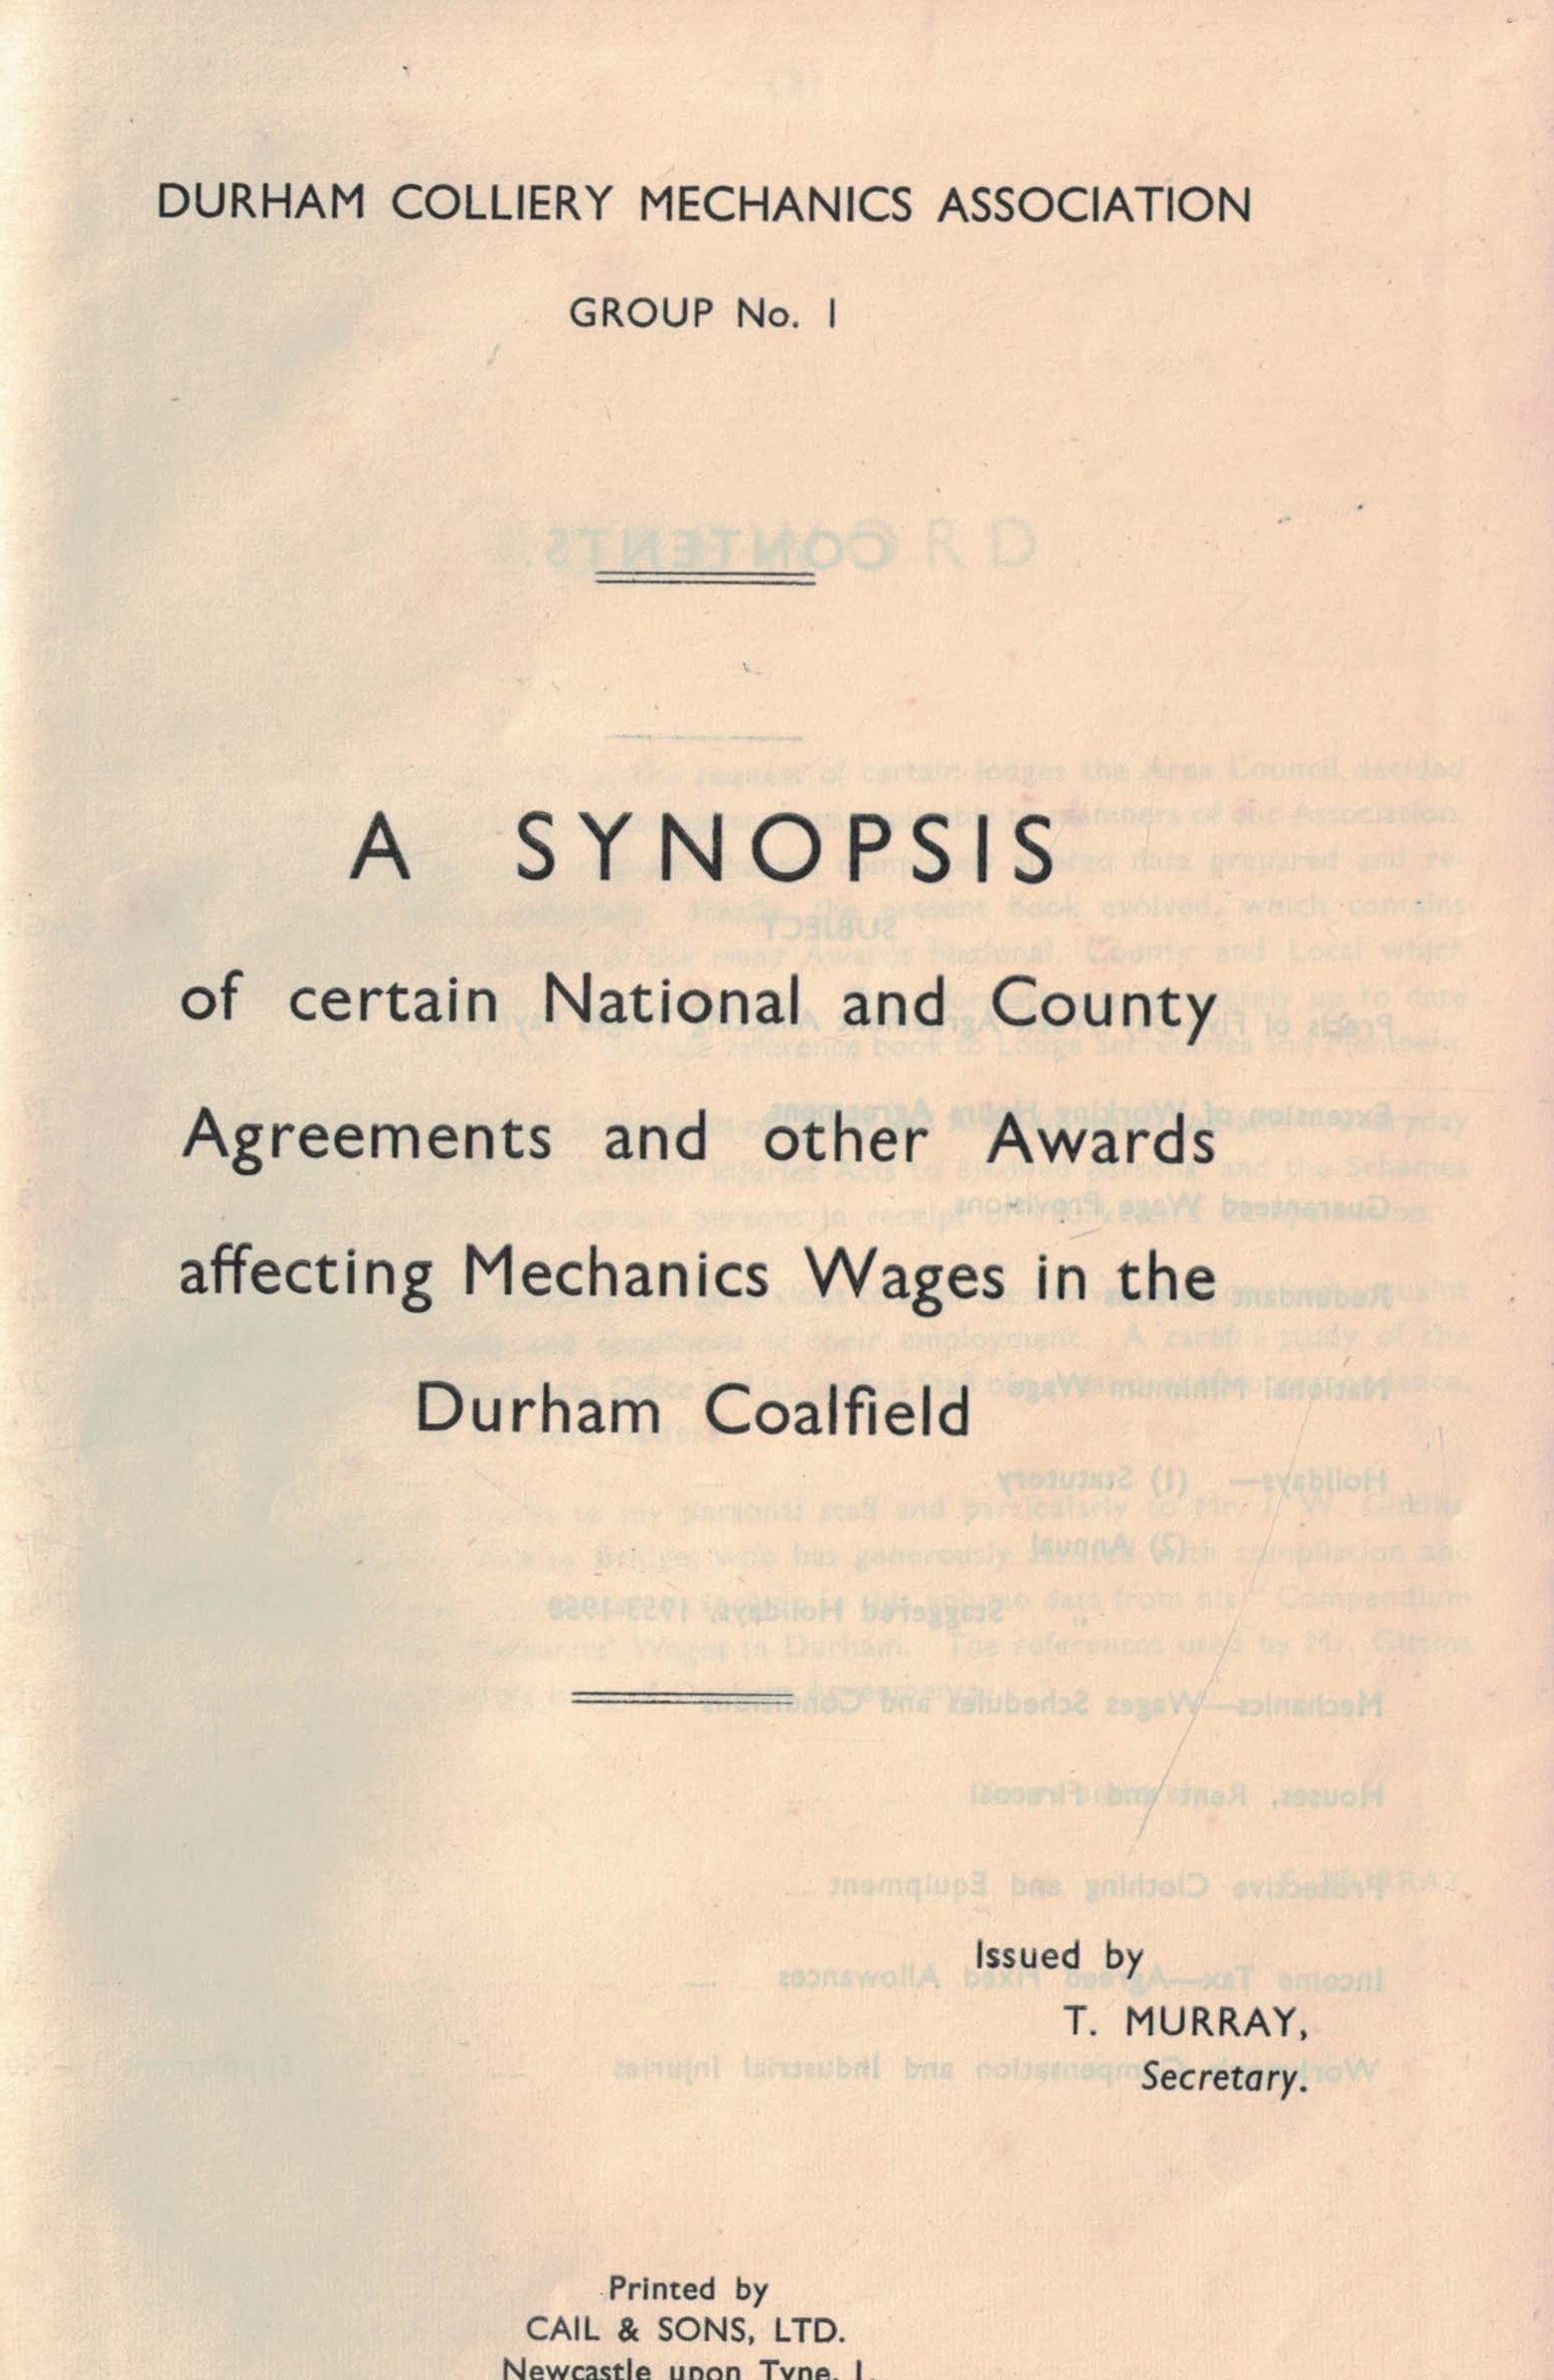 A Synopsis of Certain National & County Agreements & Other Awards Affecting Mechanics Wages in the Durham Coalfield